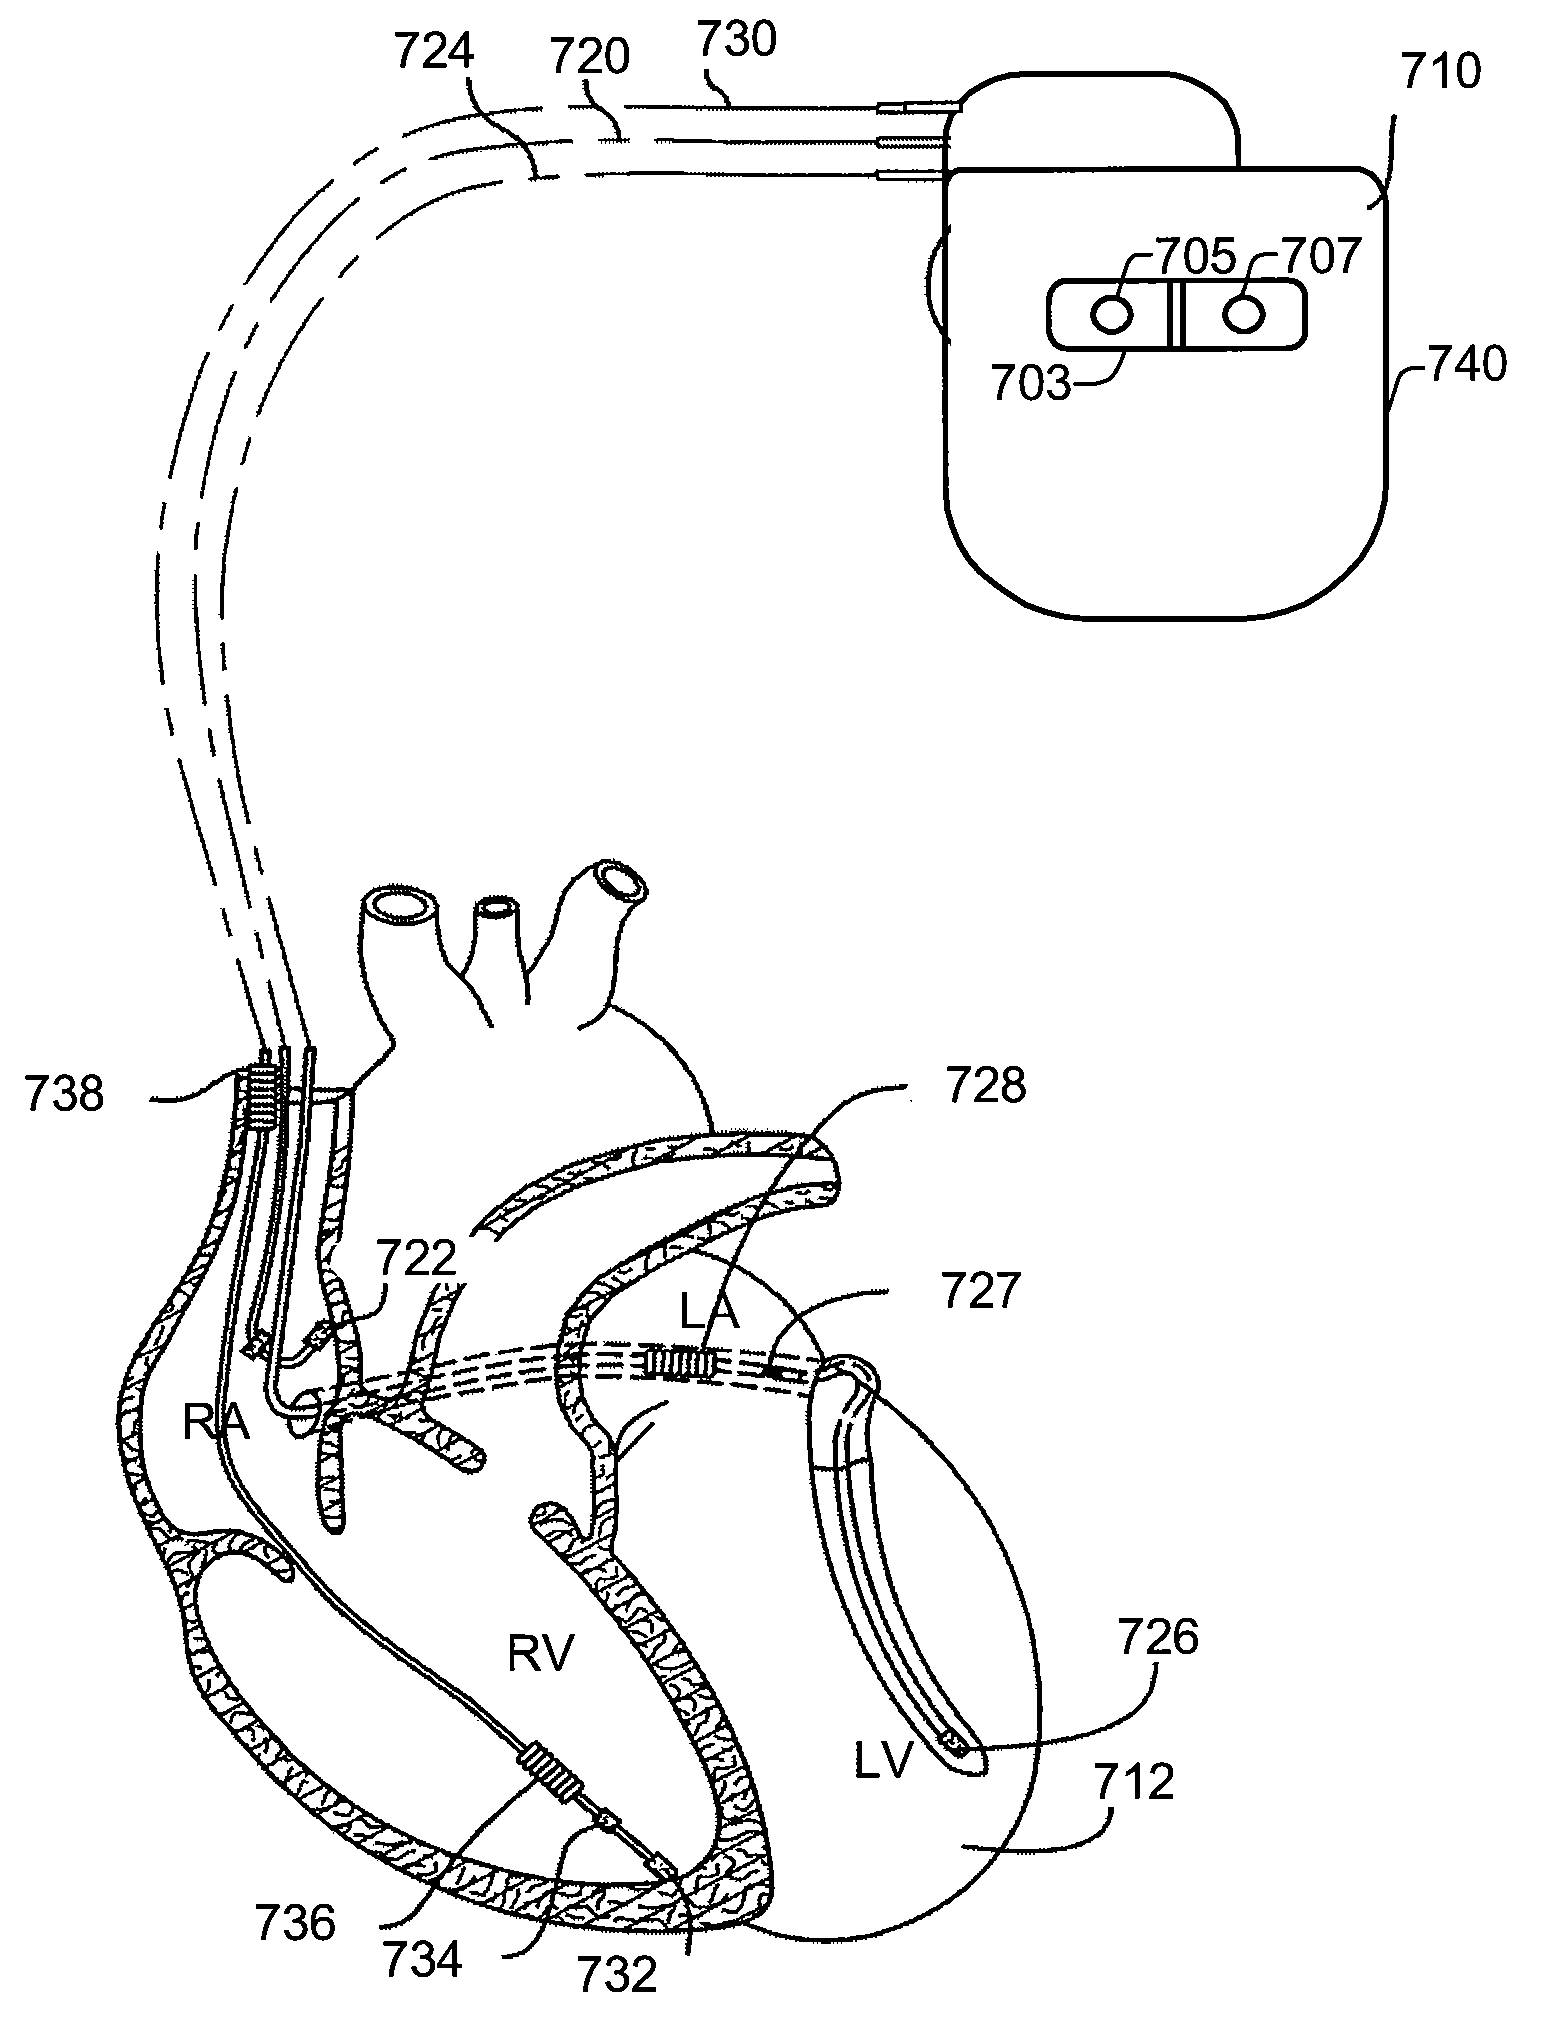 Methods and systems to monitor cardiac contractility